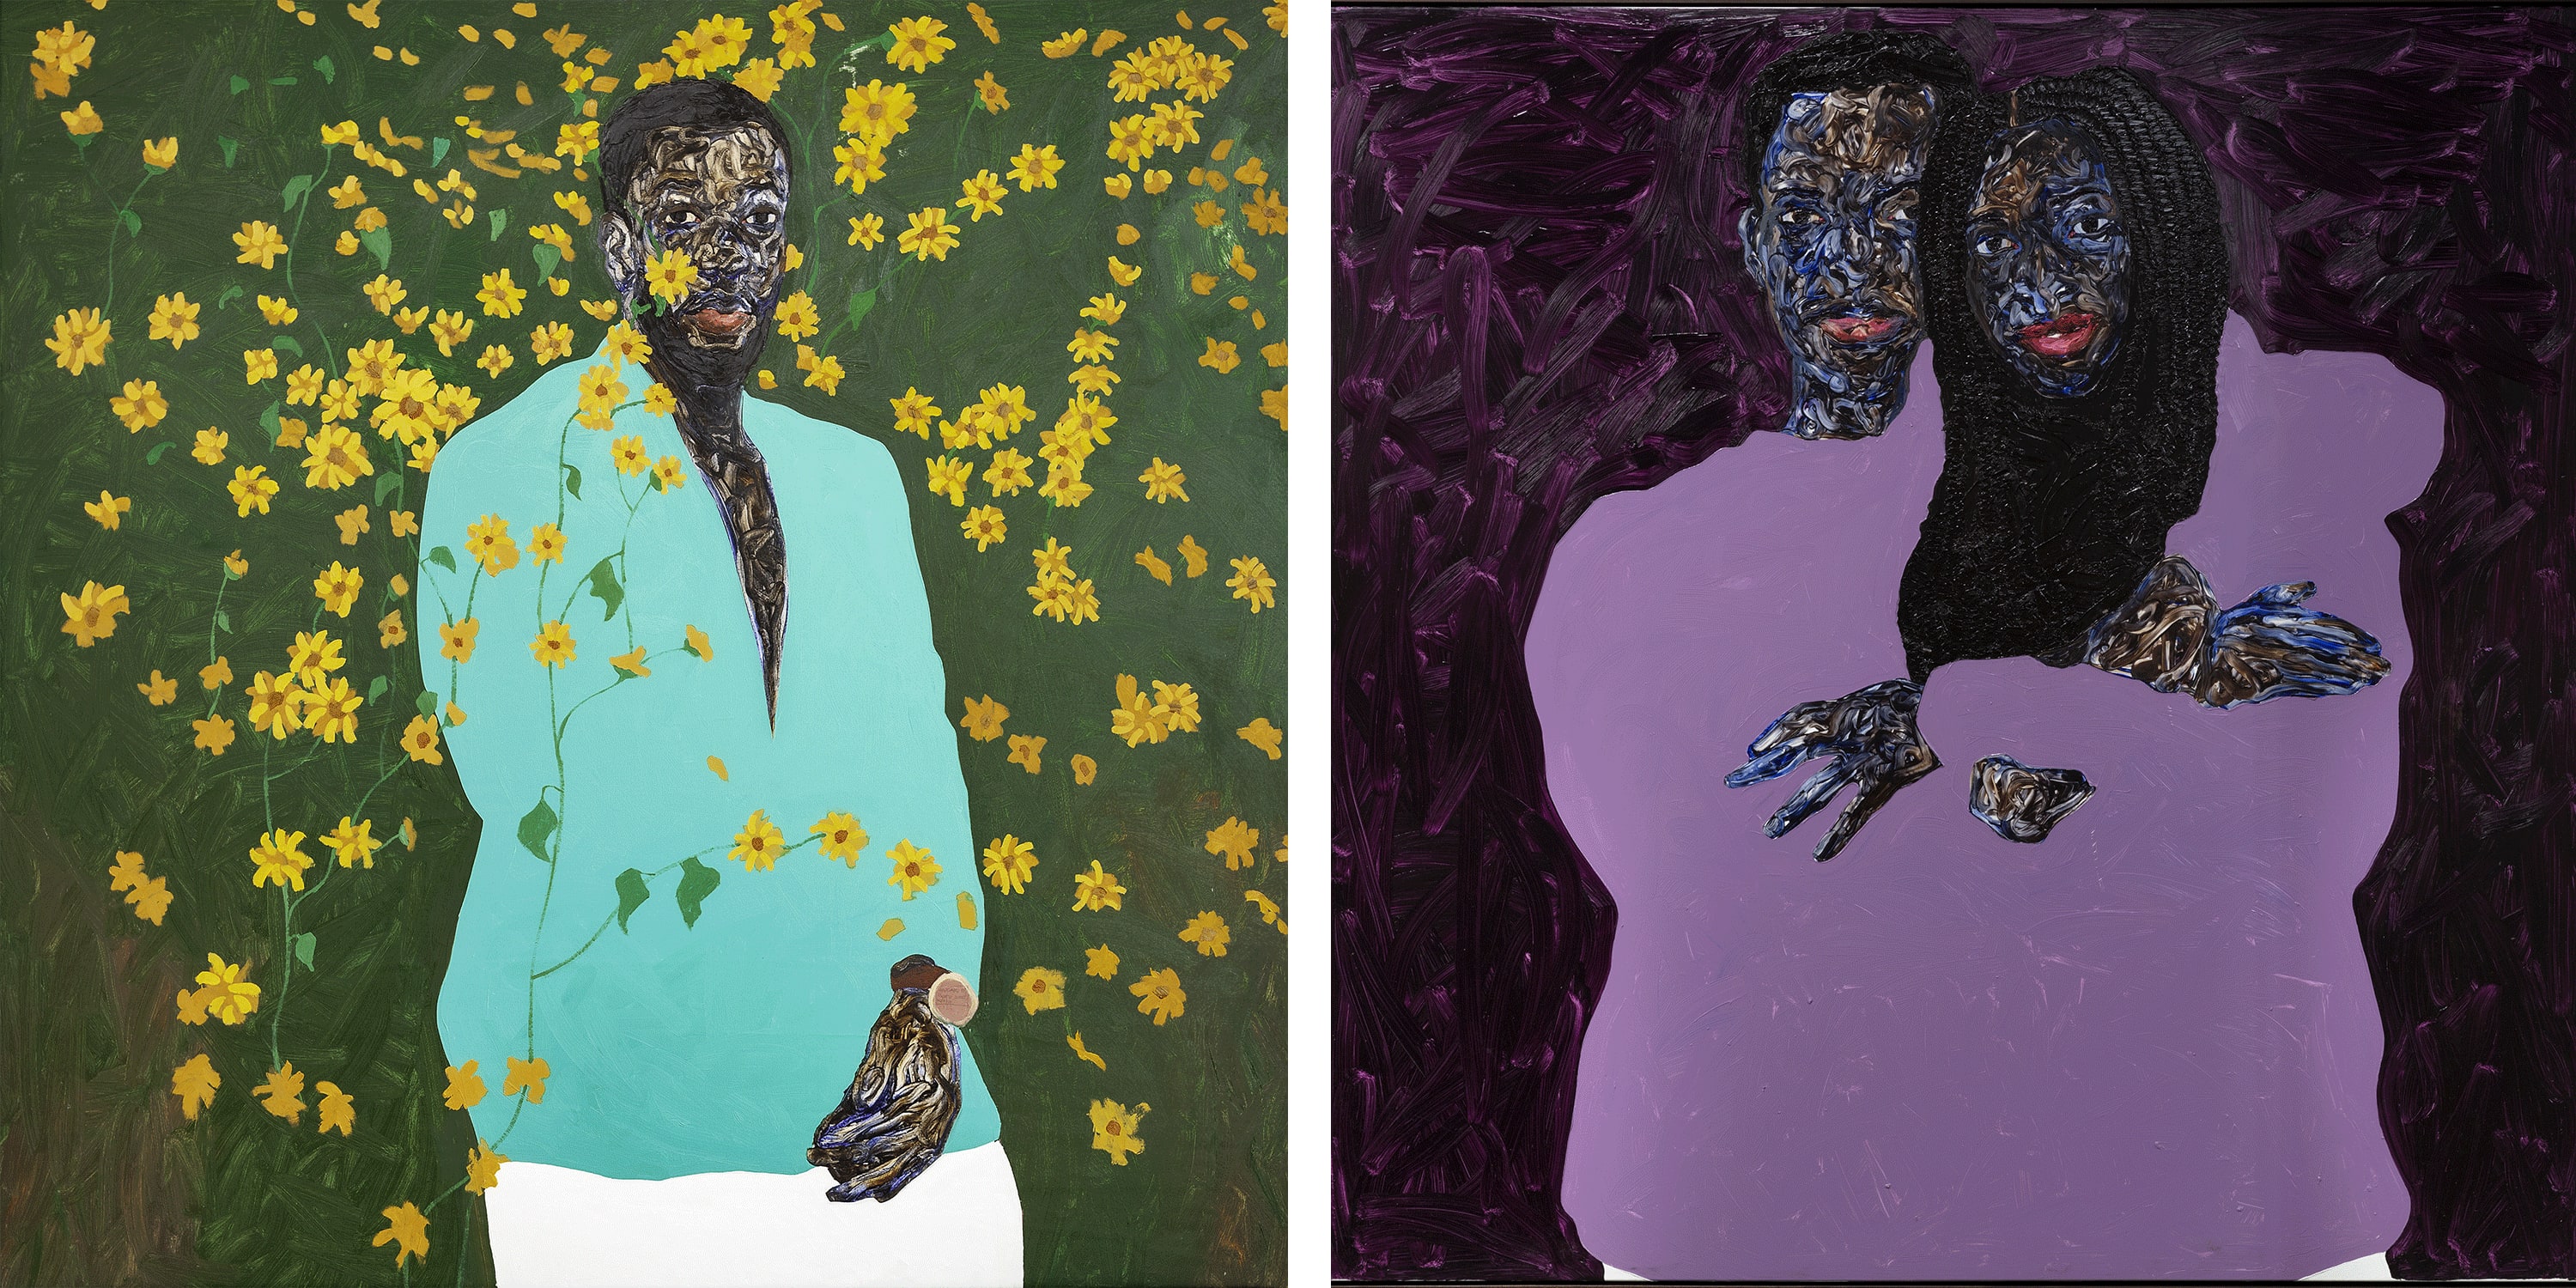 Artworks by Amoako Boafo, courtesy of Mariane Ibrahim. Left SUNFLOWER FIELD, 2022. Right: Hug from behind, 2022.